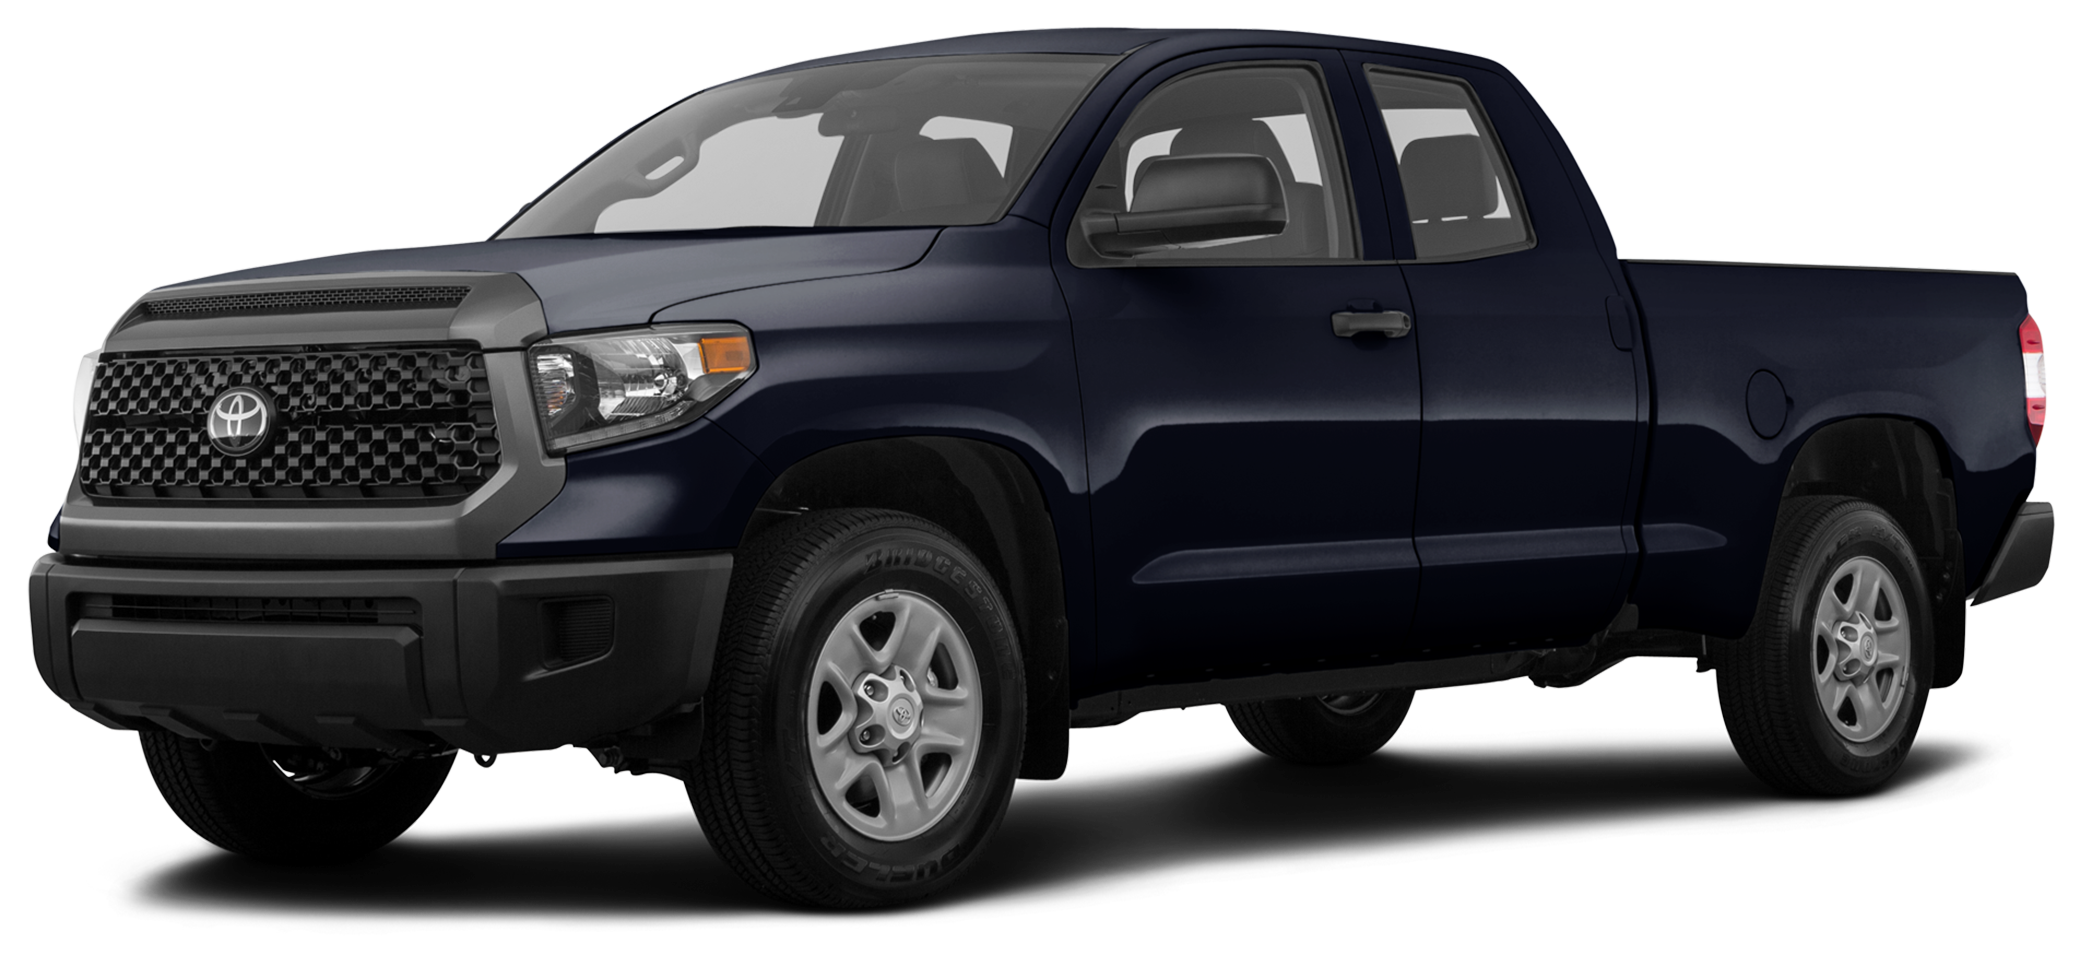 2019 Toyota Tundra Incentives, Specials & Offers in Peoria AZ